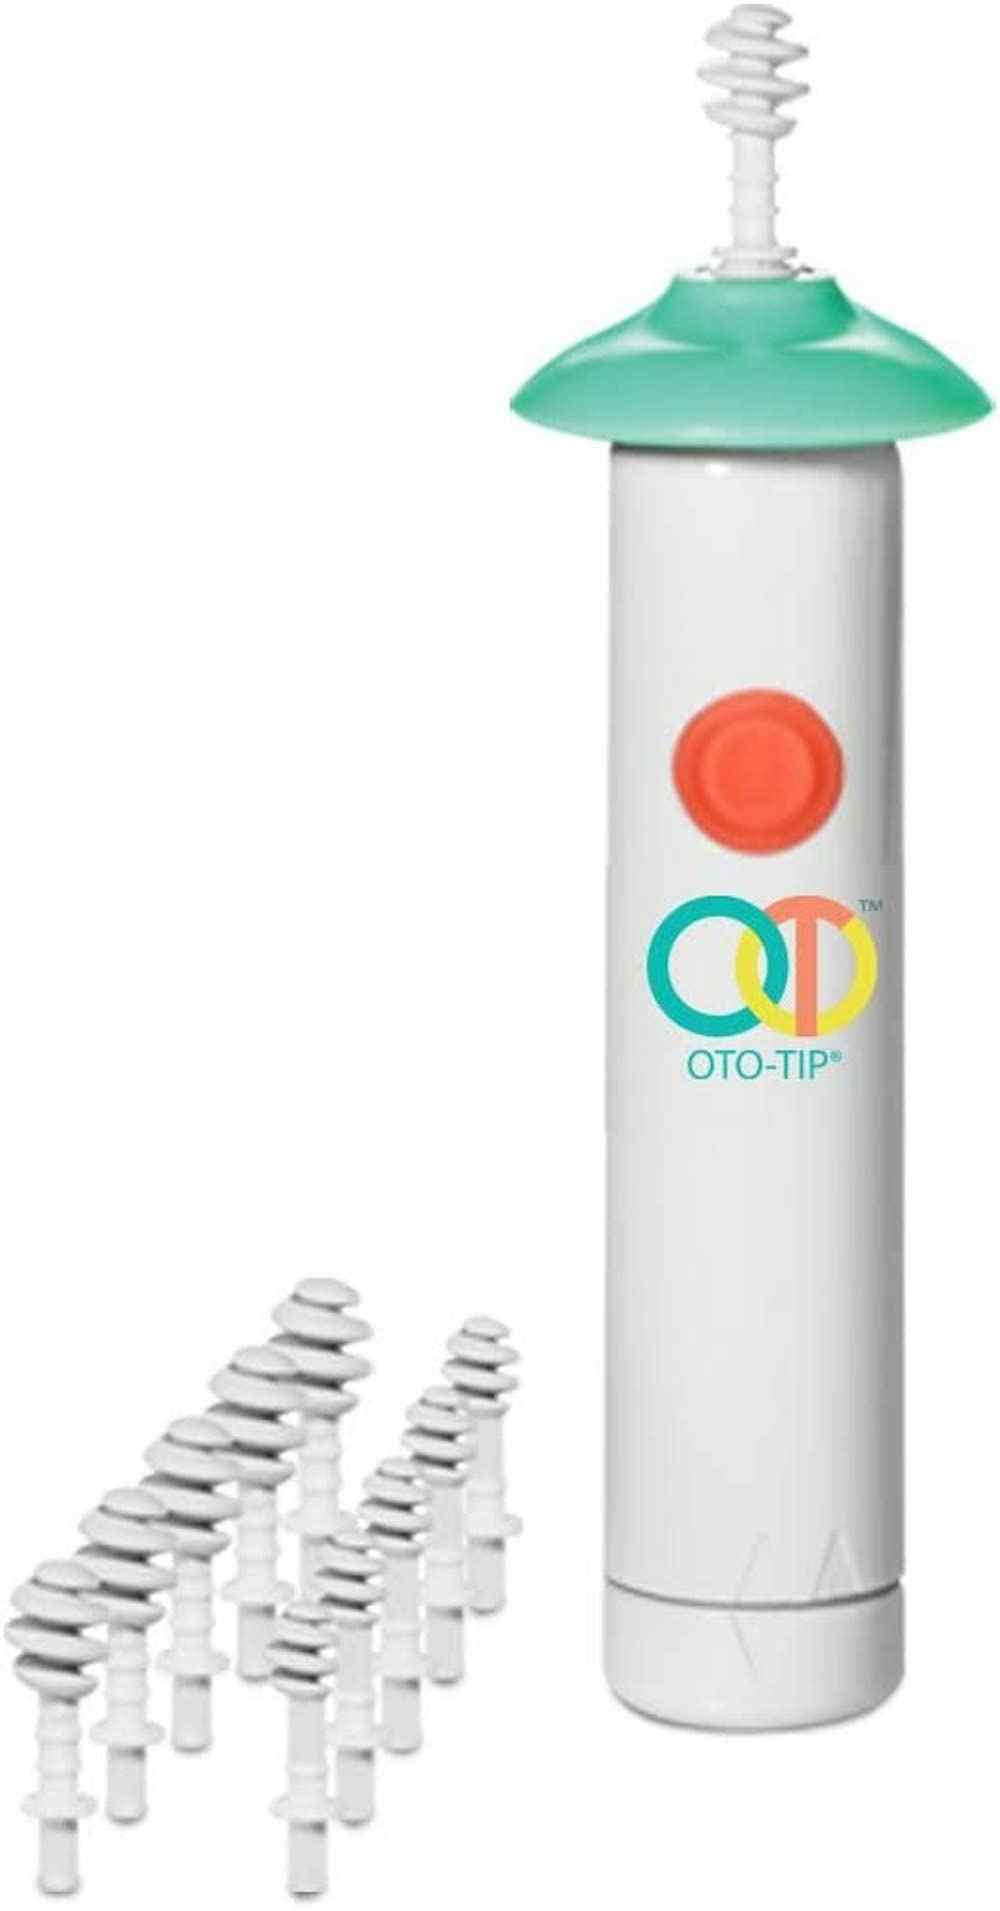 OTO-TIP Mixed Replacement Tips